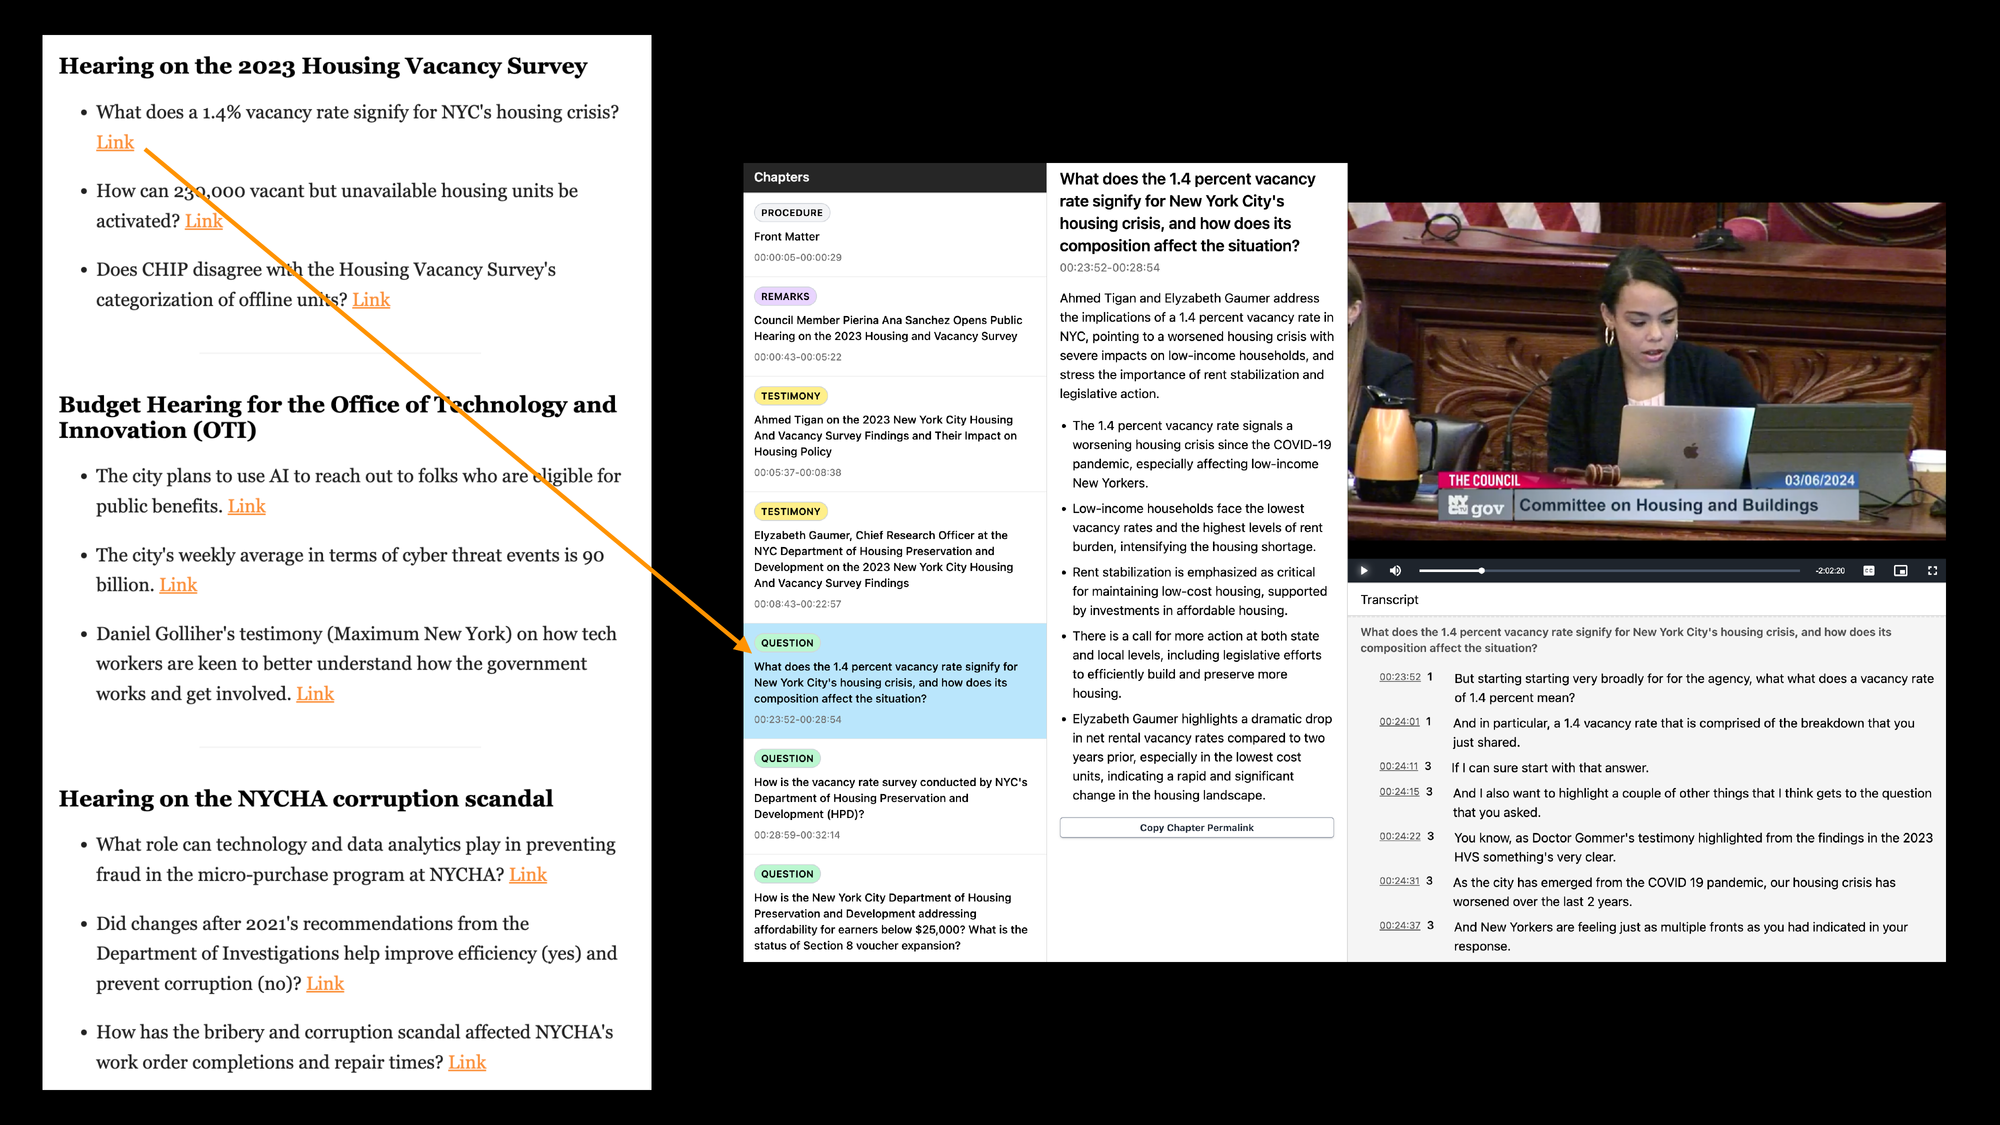 On the left, a screenshot of the citymeetings.nyc newsletter with three sections for different hearings. Each section has three bullet points, with a sentence and a link. The first bullet under Hearing on the 2023 Housing and Vacancy Survey NYC says What does a 1.4% vacancy rate signify for NYCs housing crisis? and then says Link. There an arrow pointing from that link to a screenshot of the Hearing on the 2023 Housing Vacancy Survey in citymeetings.nyc. The arrow points to a chapter with the same title as the question. There is a title and description of the chapter, and the video and transcript are open on the same page, starting at that chapter.